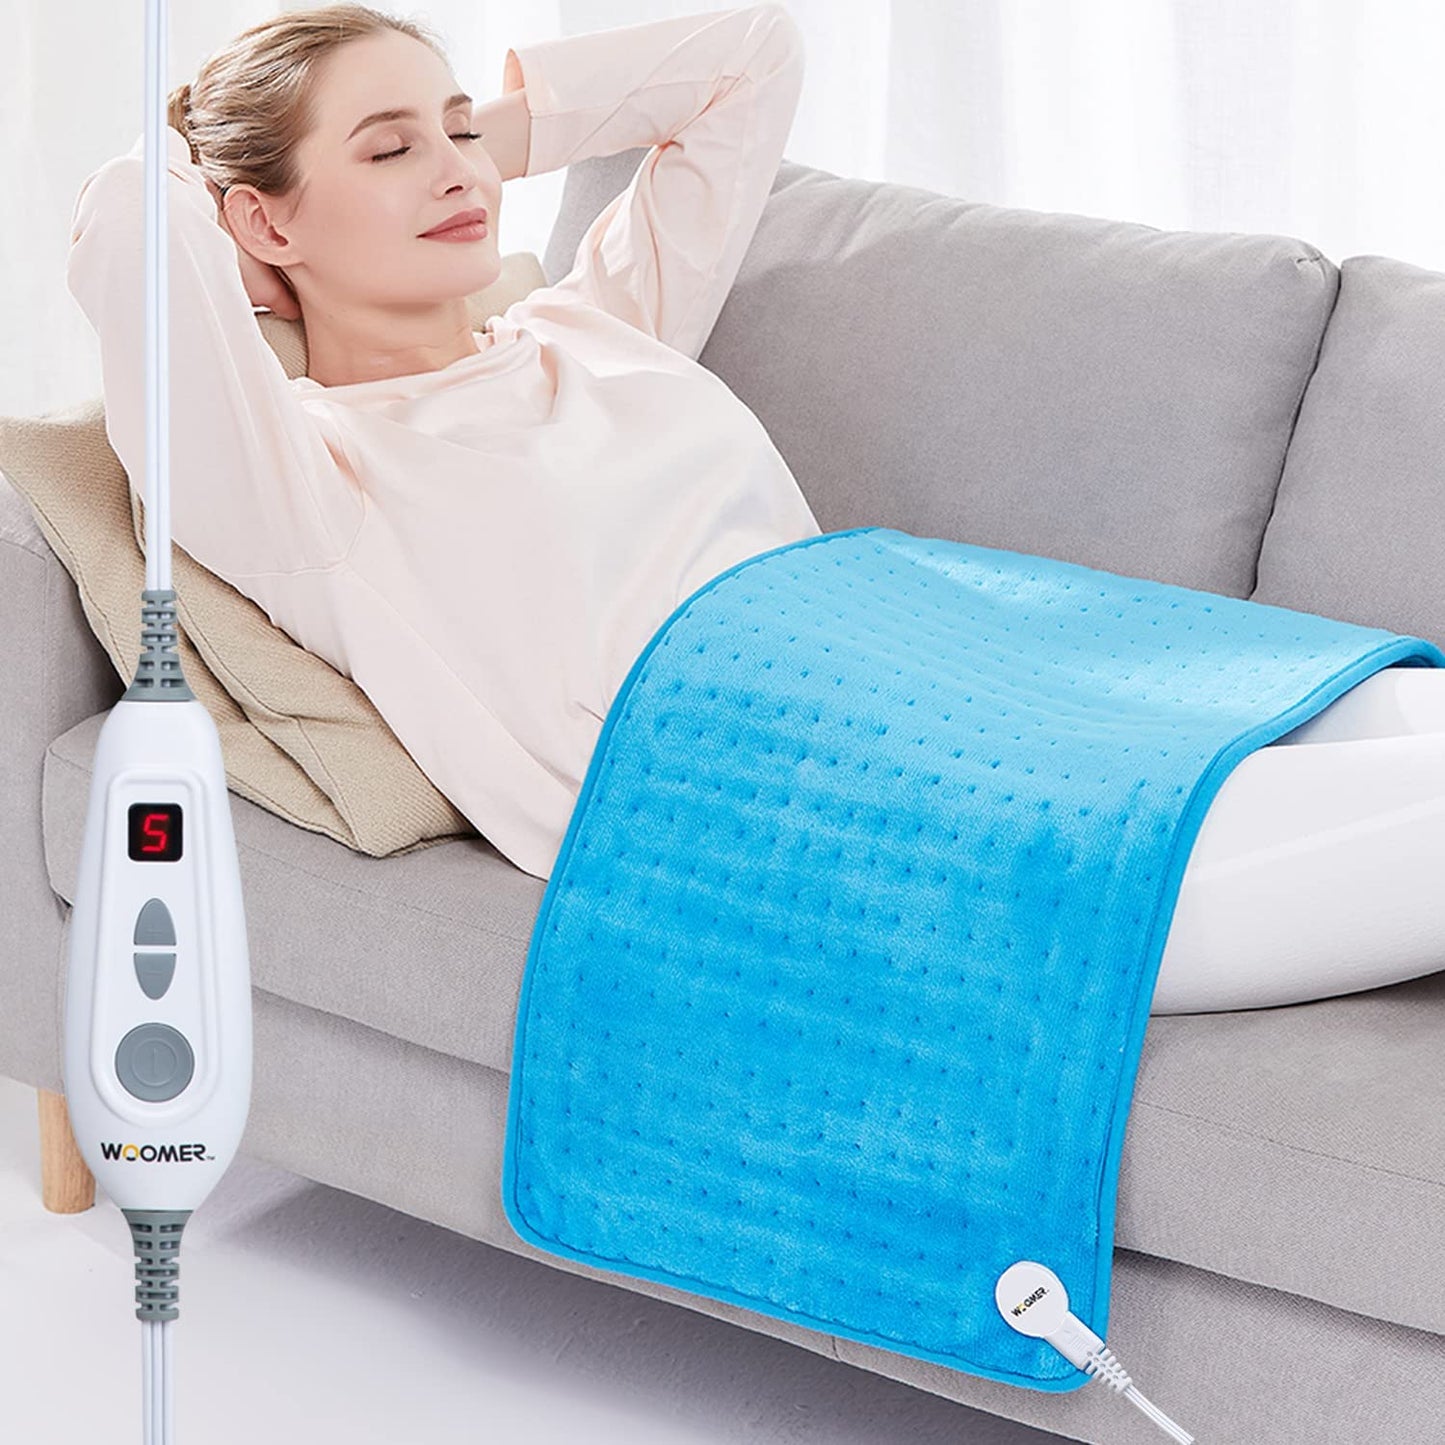 Electric Heating Pad for Back Pain & Cramps Relief, 12"X24" Extra Large, Heat Pad with Multi-Color Option, Moist Heat Therapy Feature, Auto Shut-Off, Power Cords Storage Belt